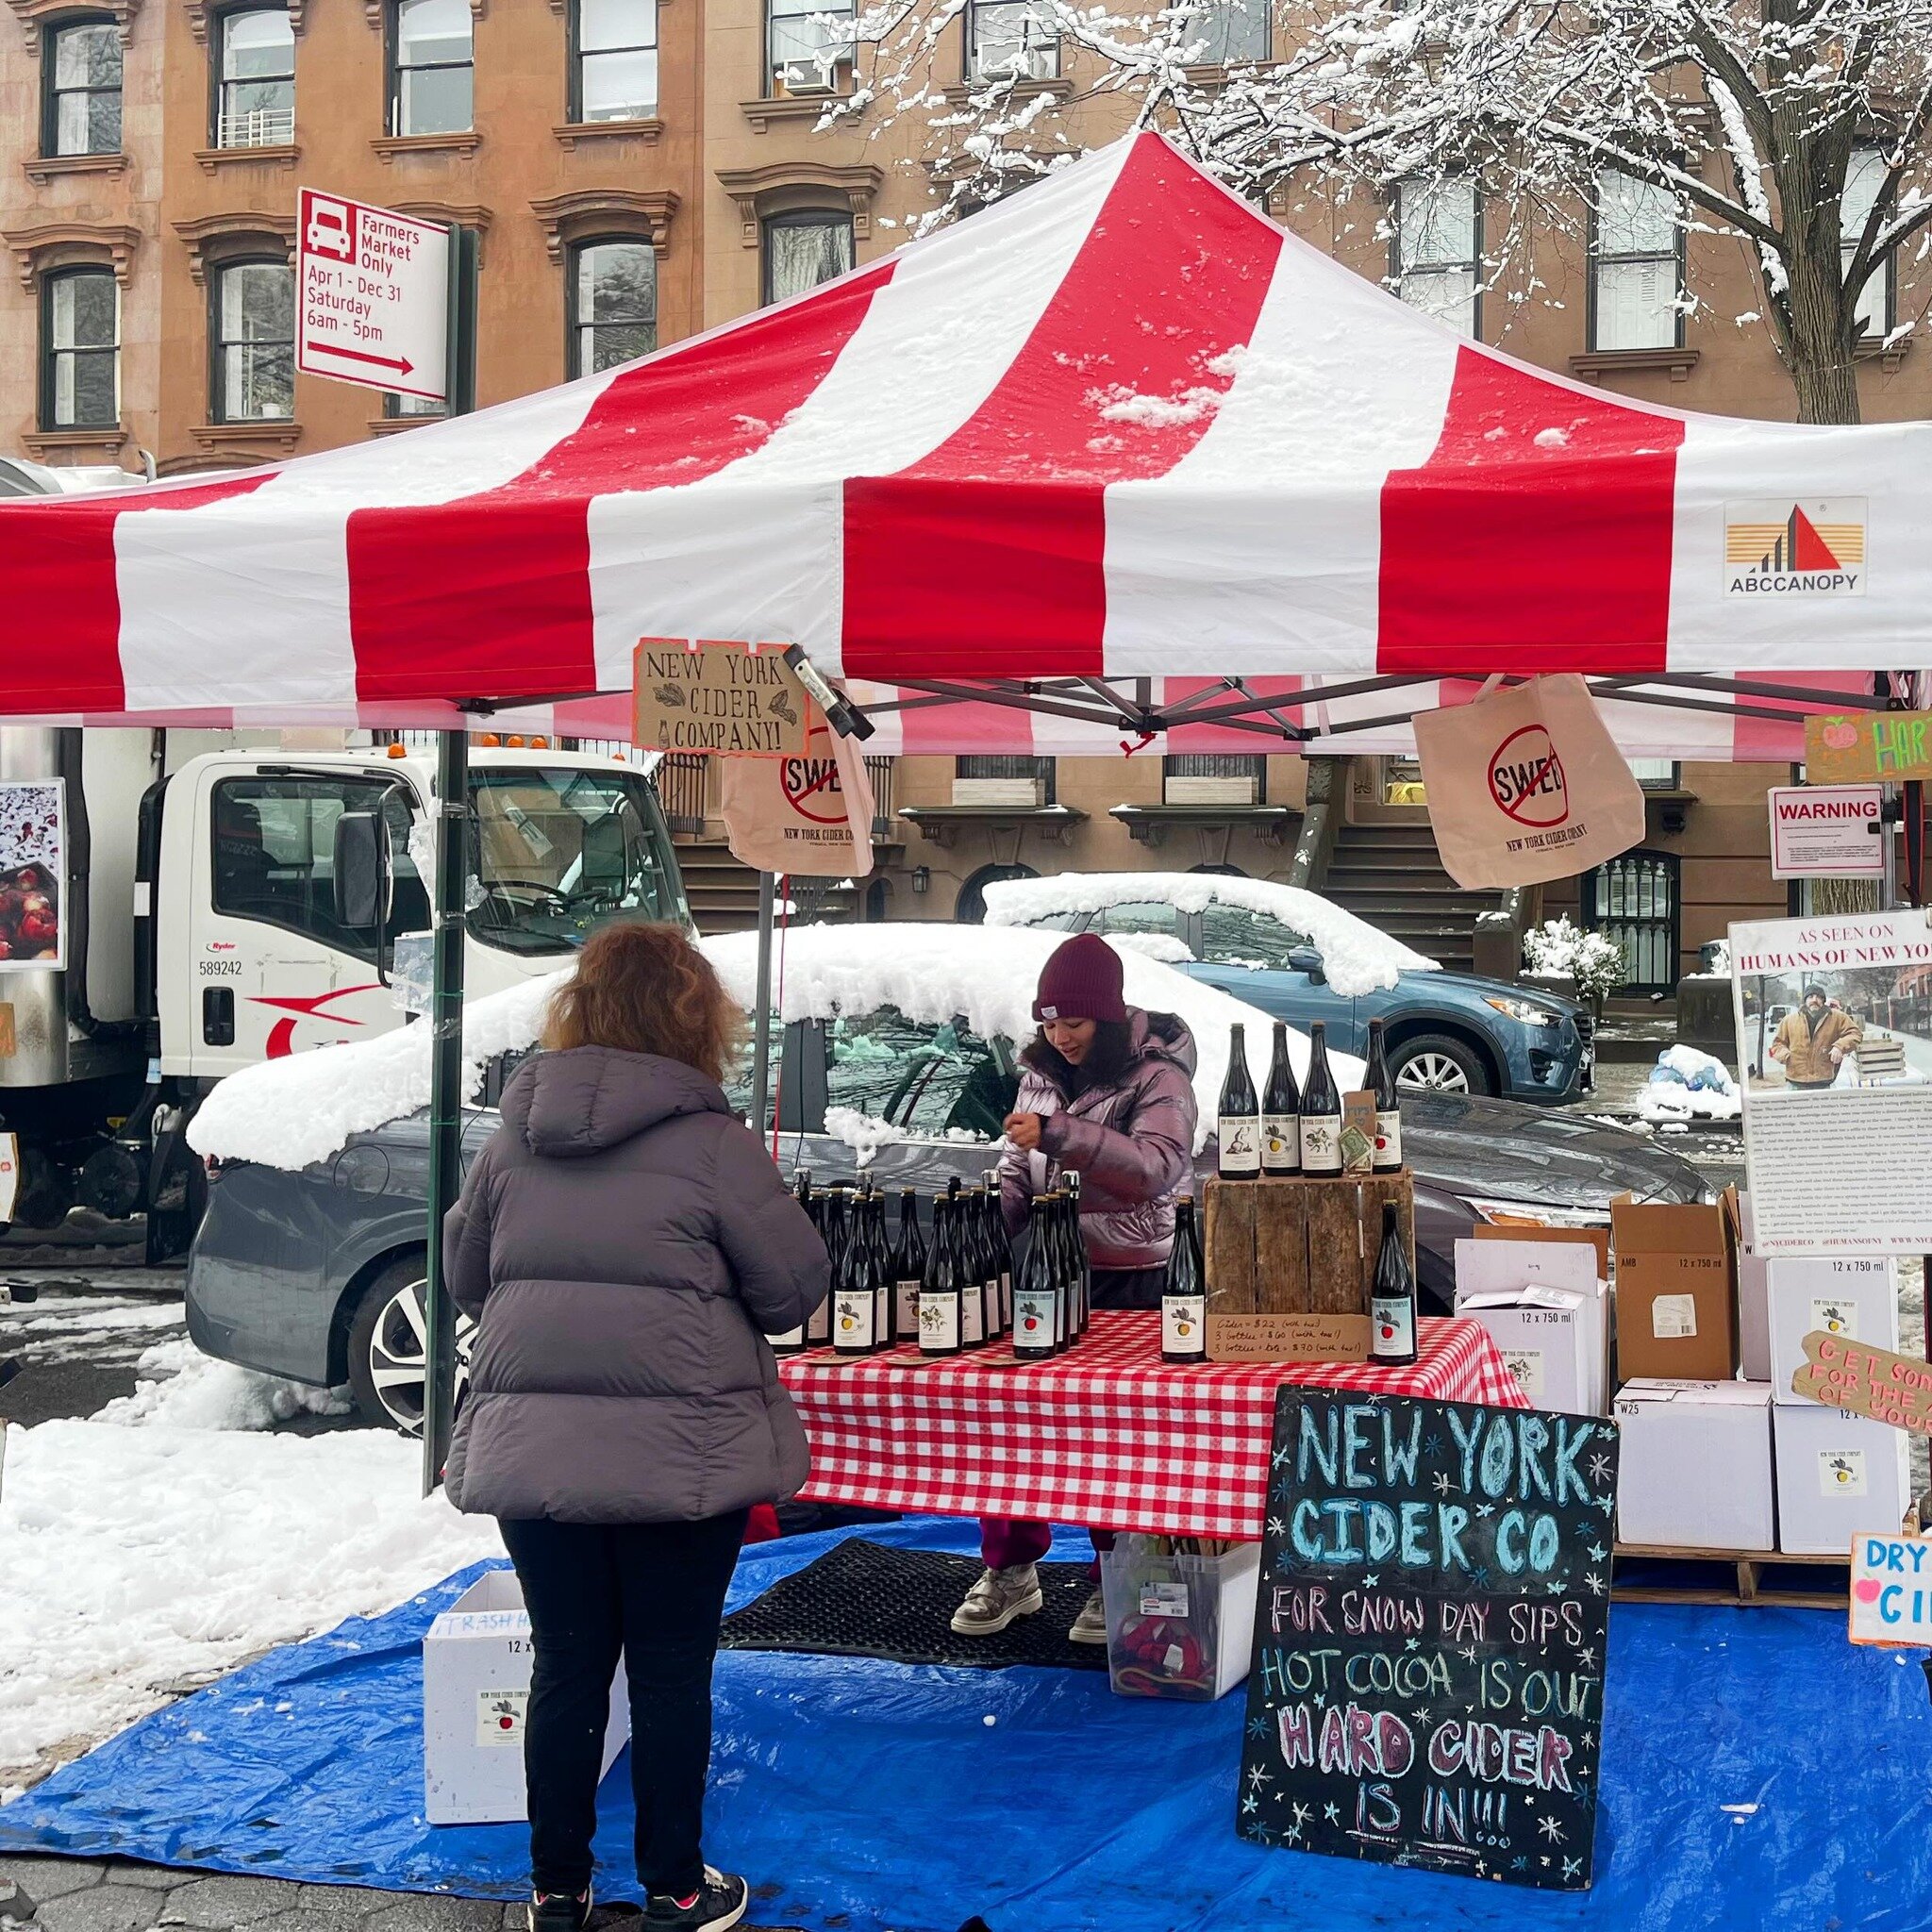 Please come to the markets today! Seems like the snow scared a lot of people off. Snow is absolutely beautiful, but after Dry January, I&rsquo;d prefer it happen on non-market days!